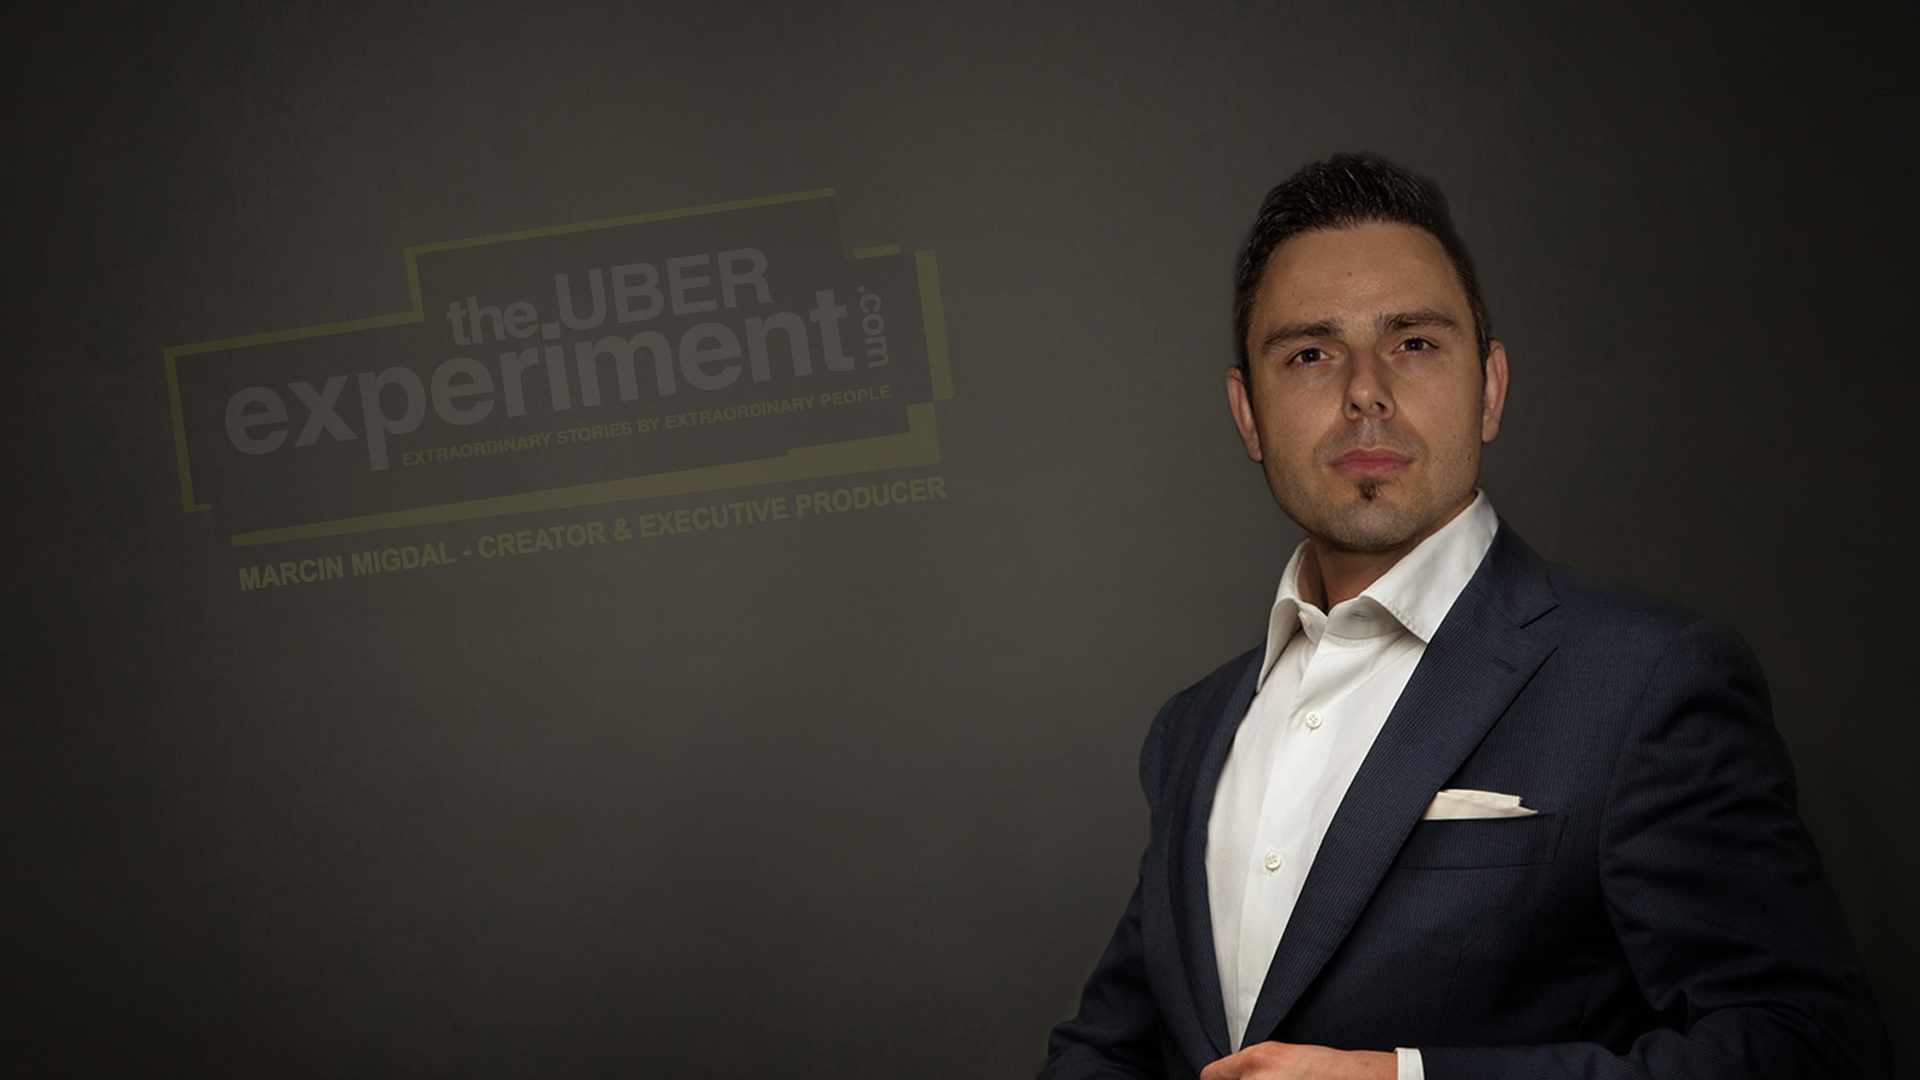 Marcin Migdal - The Uber Experiment Reality Show Producer, Brand Director & Host